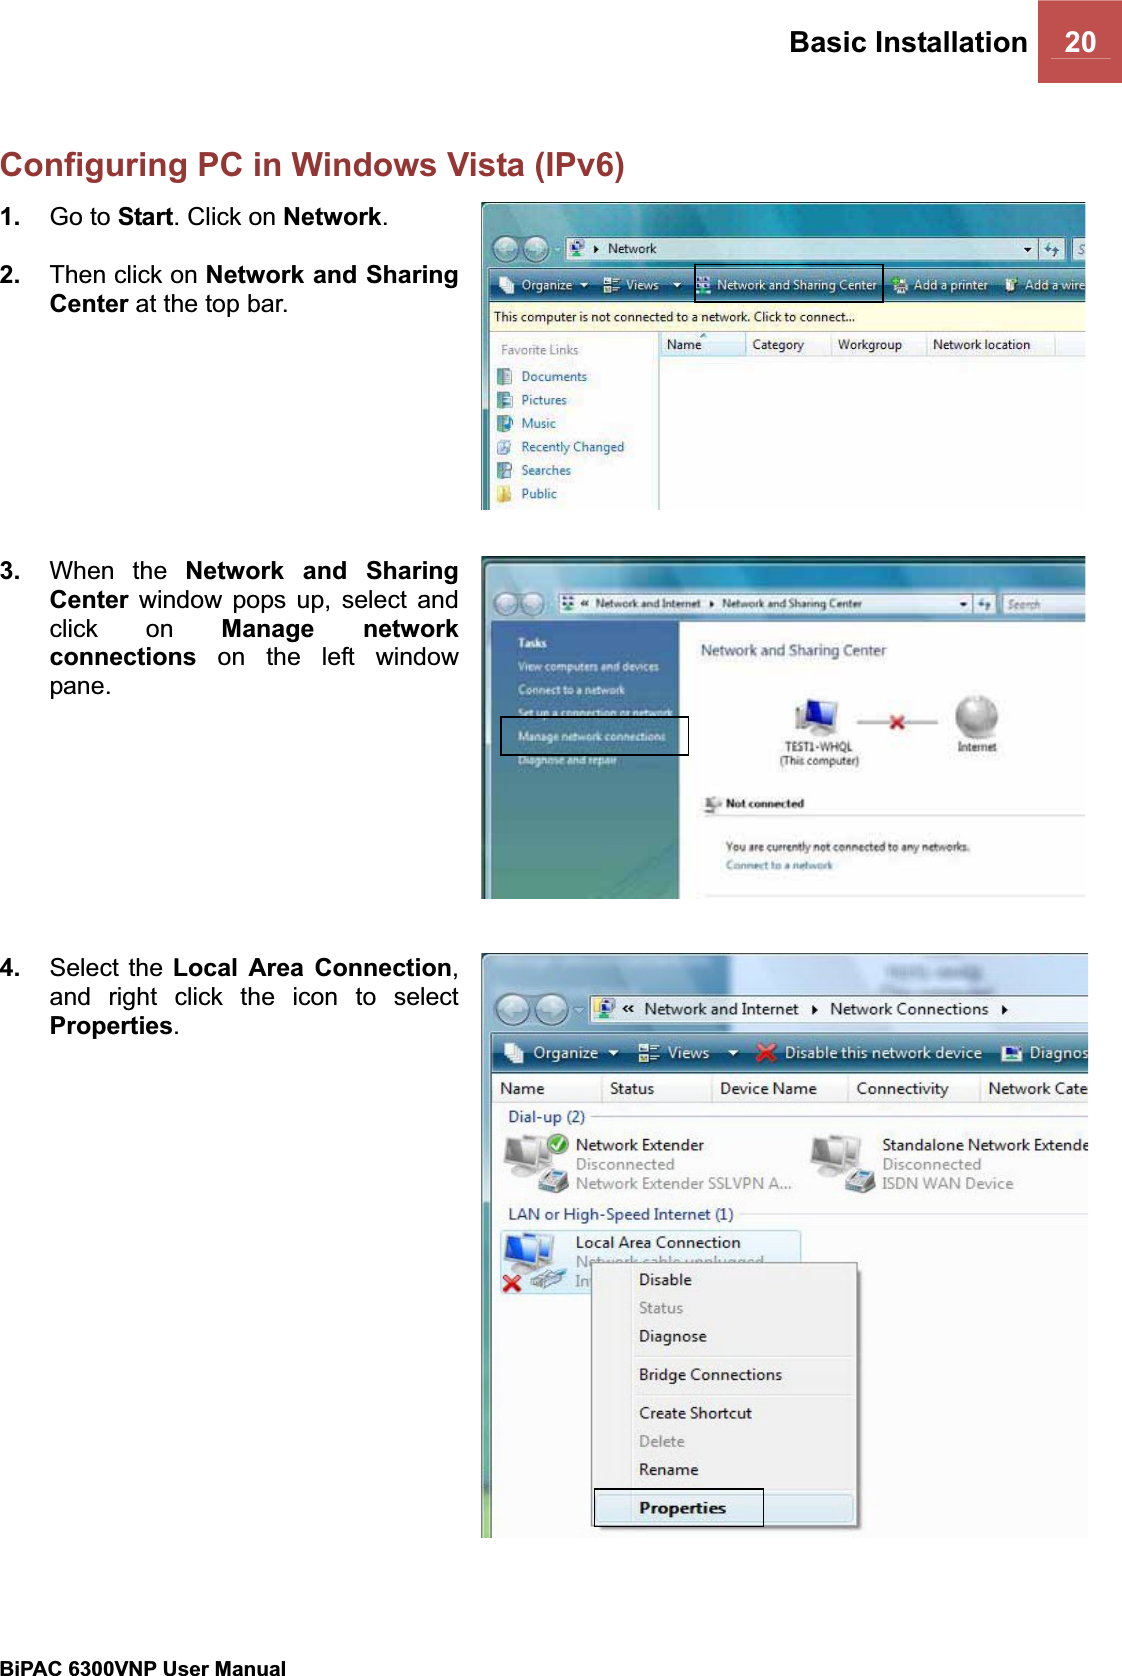 Basic Installation 20BiPAC 6300VNP User Manual                                               Configuring PC in Windows Vista (IPv6) 1. Go to Start. Click on Network.2. Then click on Network and Sharing Center at the top bar. 3. When the Network and Sharing Center window pops up, select and click on Manage network connections on the left window pane. 4. Select the Local Area Connection,and right click the icon to select Properties.